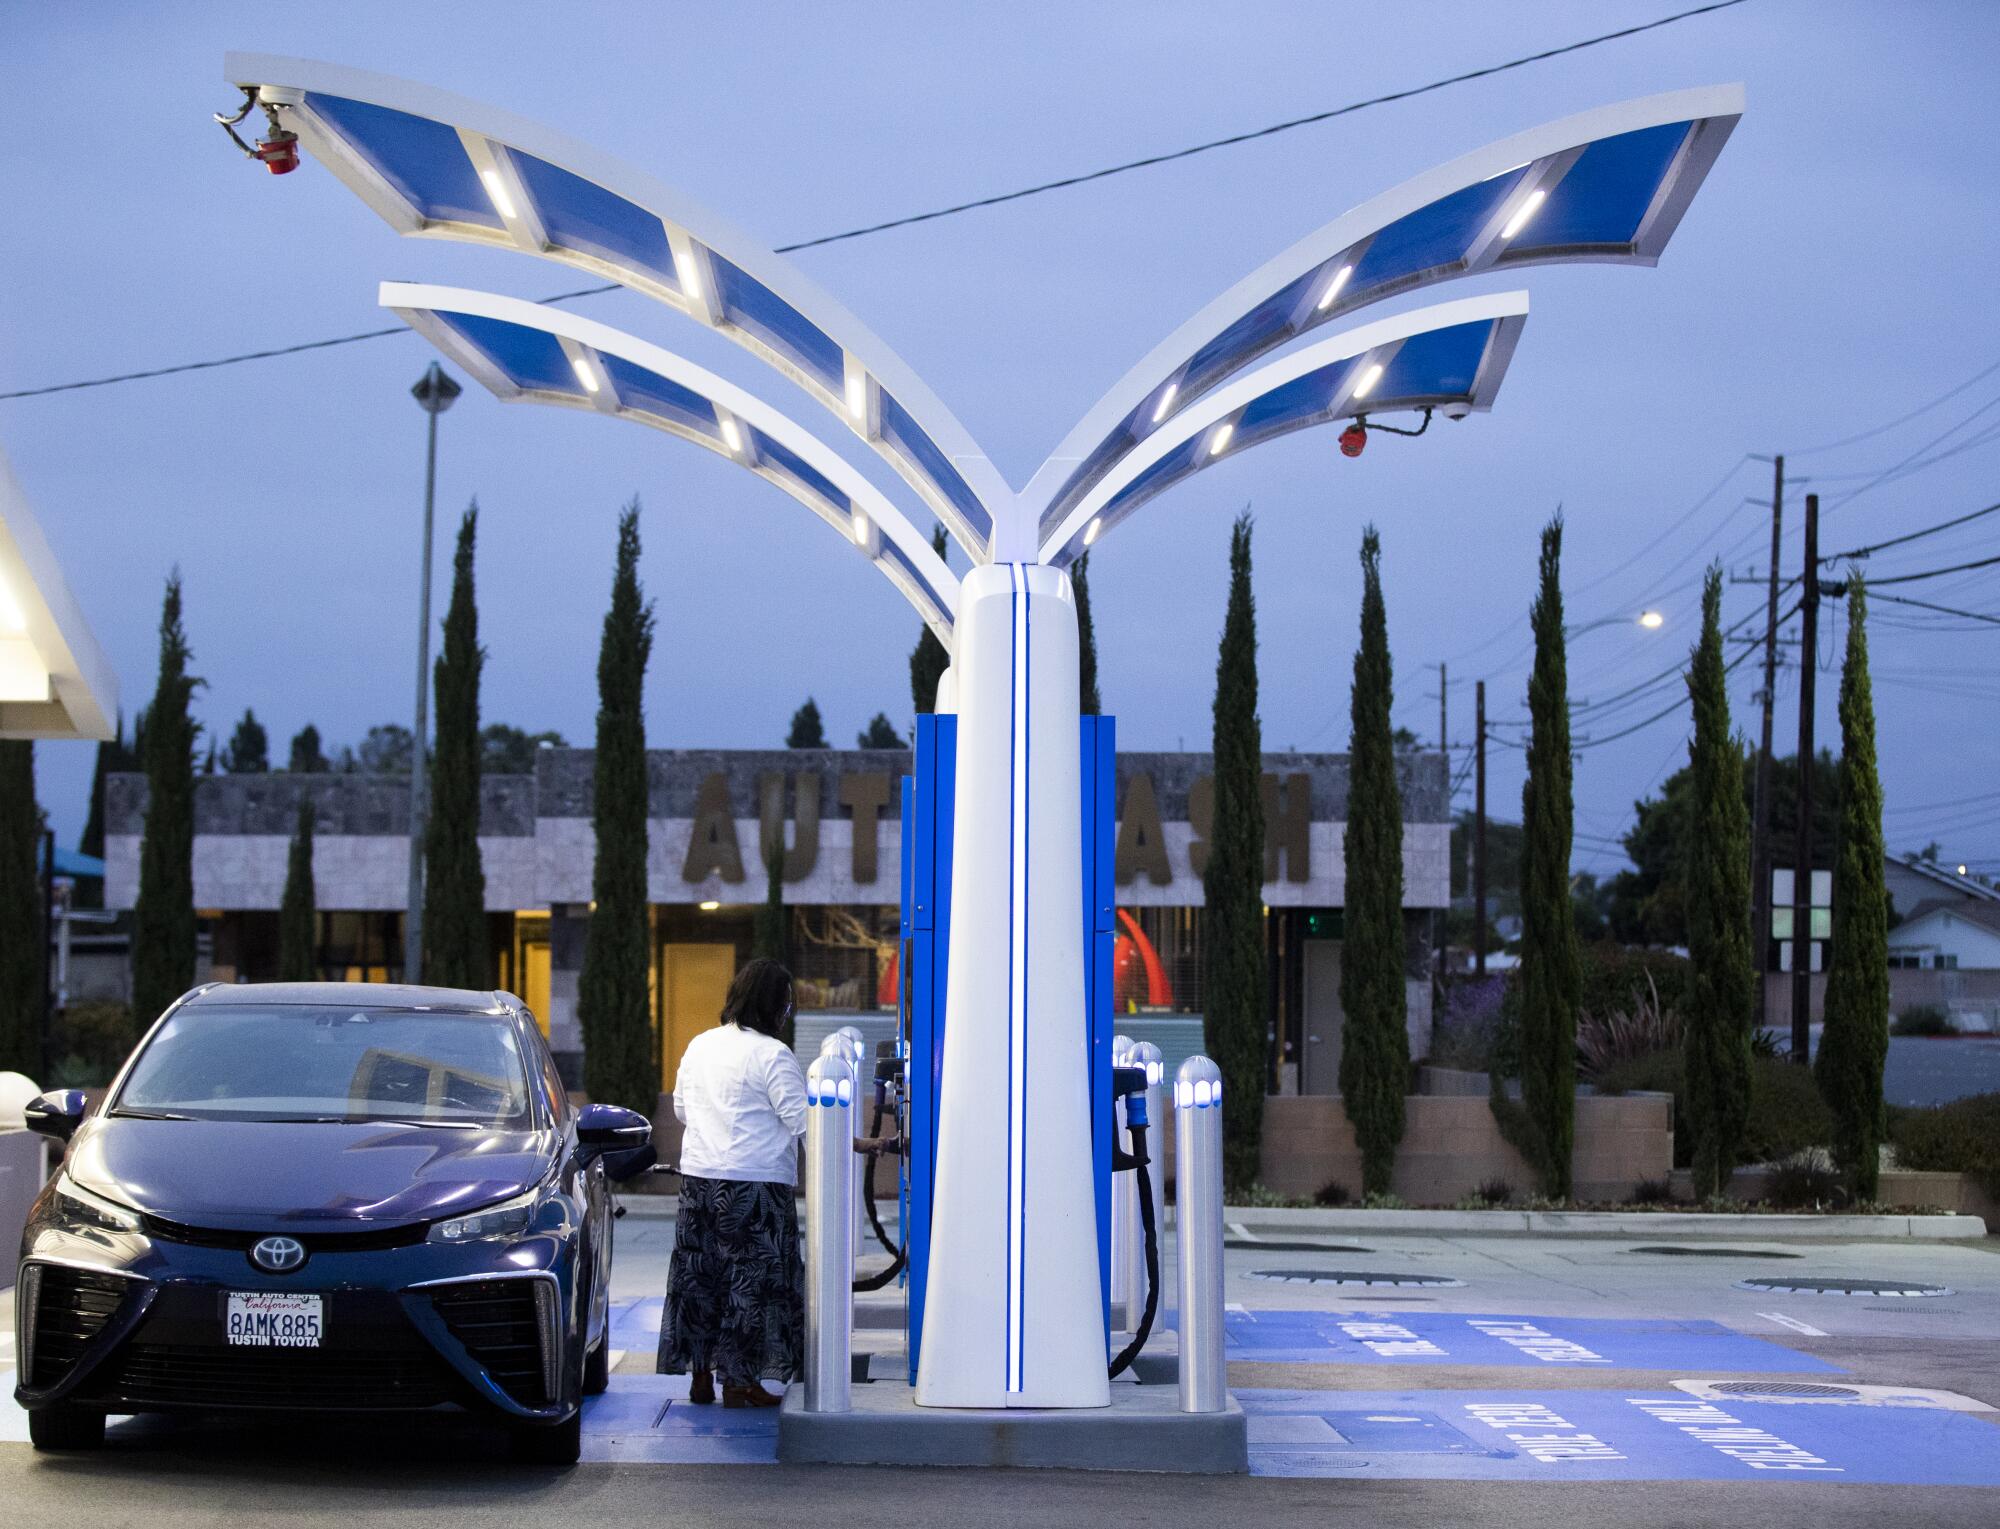 A person stands next to his vehicle under a dark gray sky.  They are in a Y-shaped hydrogen fuel pump.